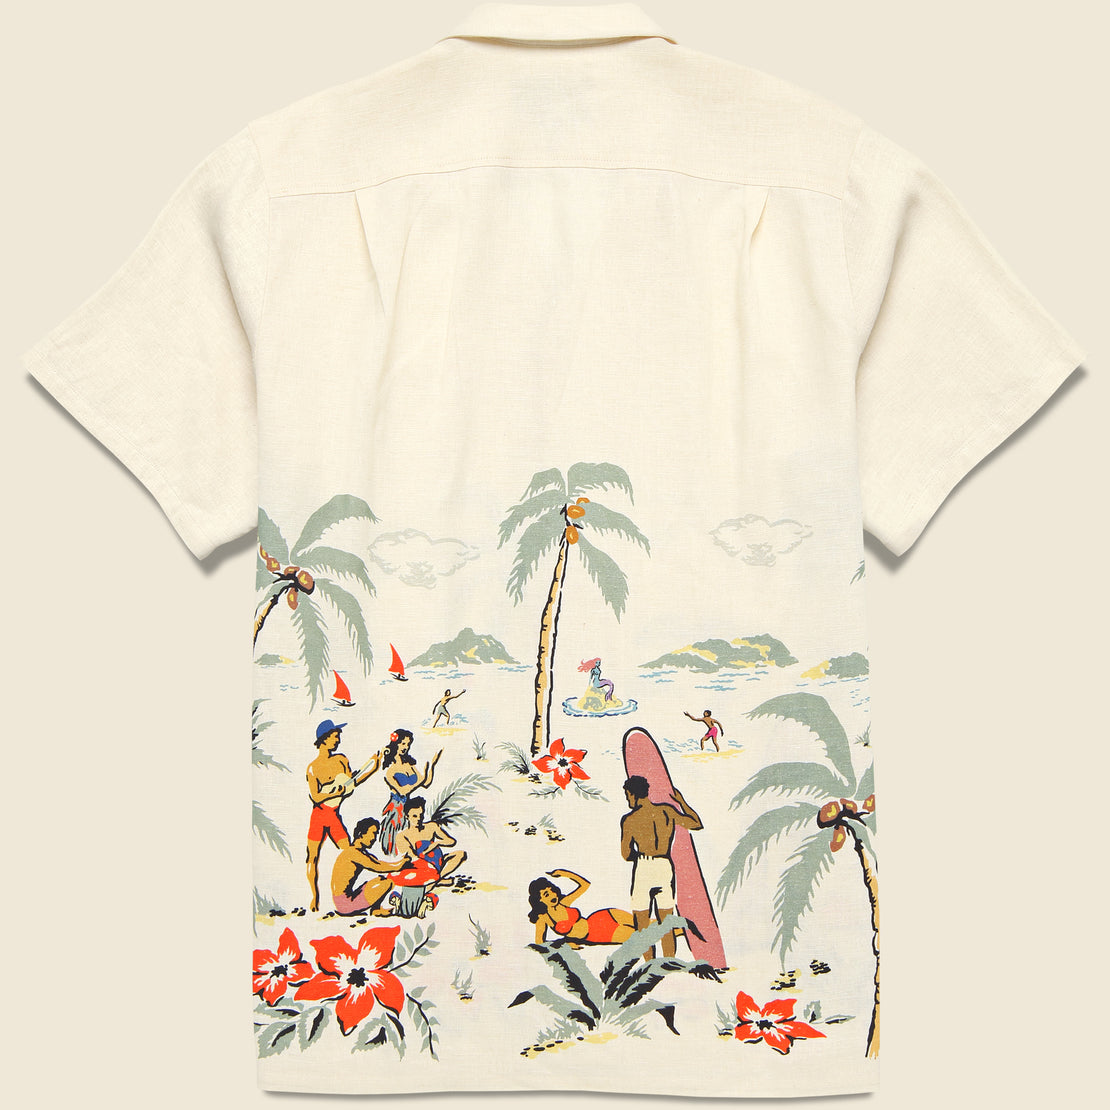 Trippin Beach Camp Shirt - Natural - Bather - STAG Provisions - Tops - S/S Woven - Other Pattern